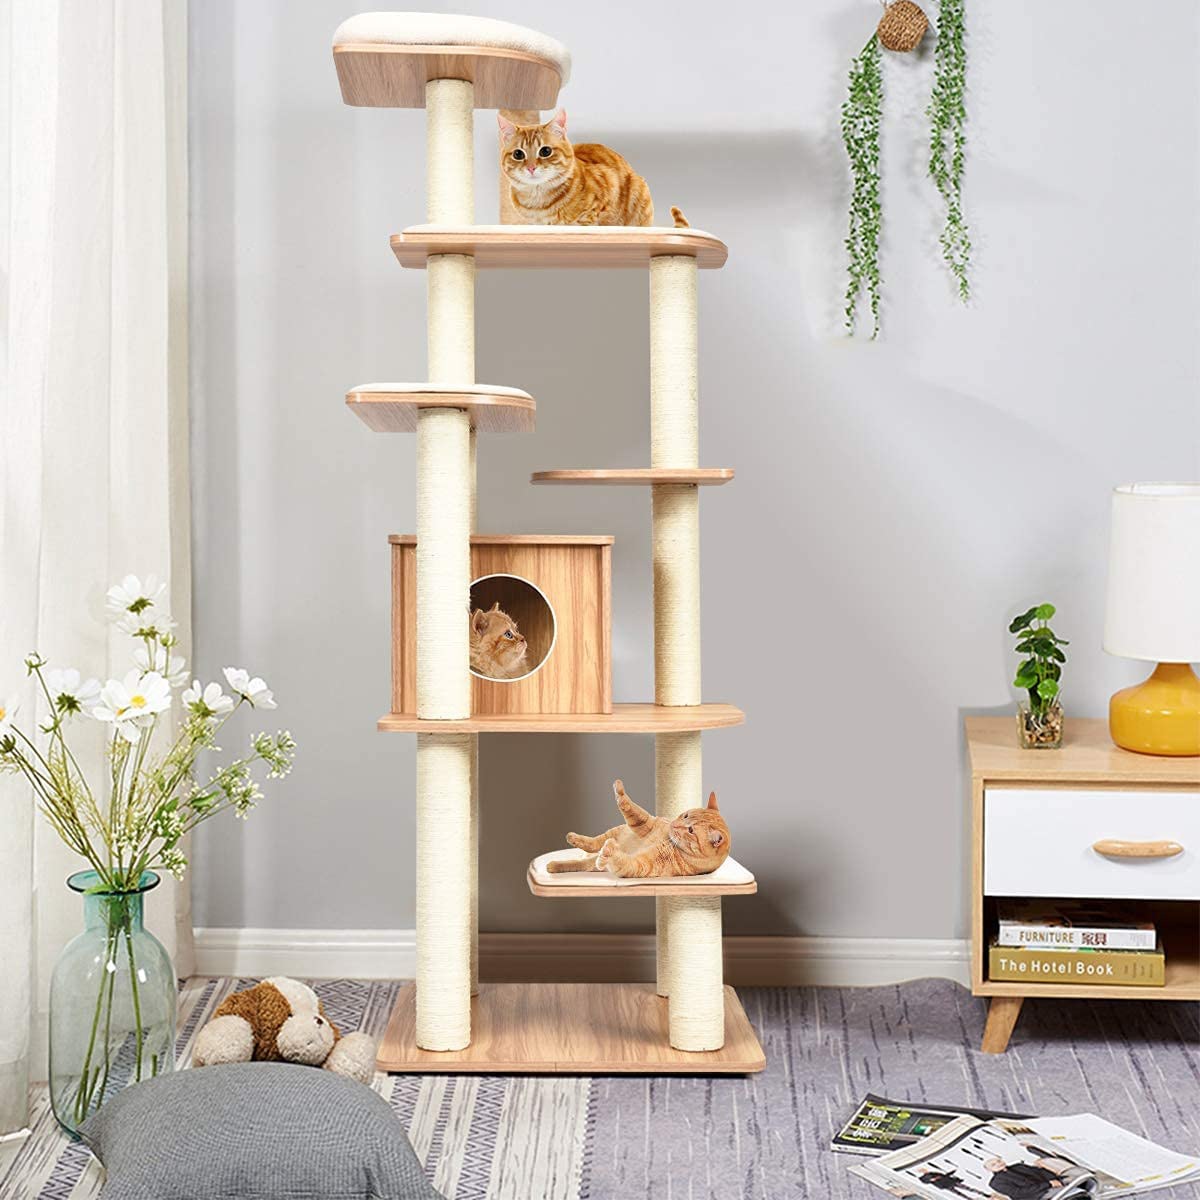 Tangkula Modern Wood Cat Tree, 69-Inch Cat Tower with Multi-Layer Platform, Cat Activity Tree with Sisal Rope Scratching Posts, Cat Condo Furniture W/Washable Plush Cushions for Large Cats Kittens